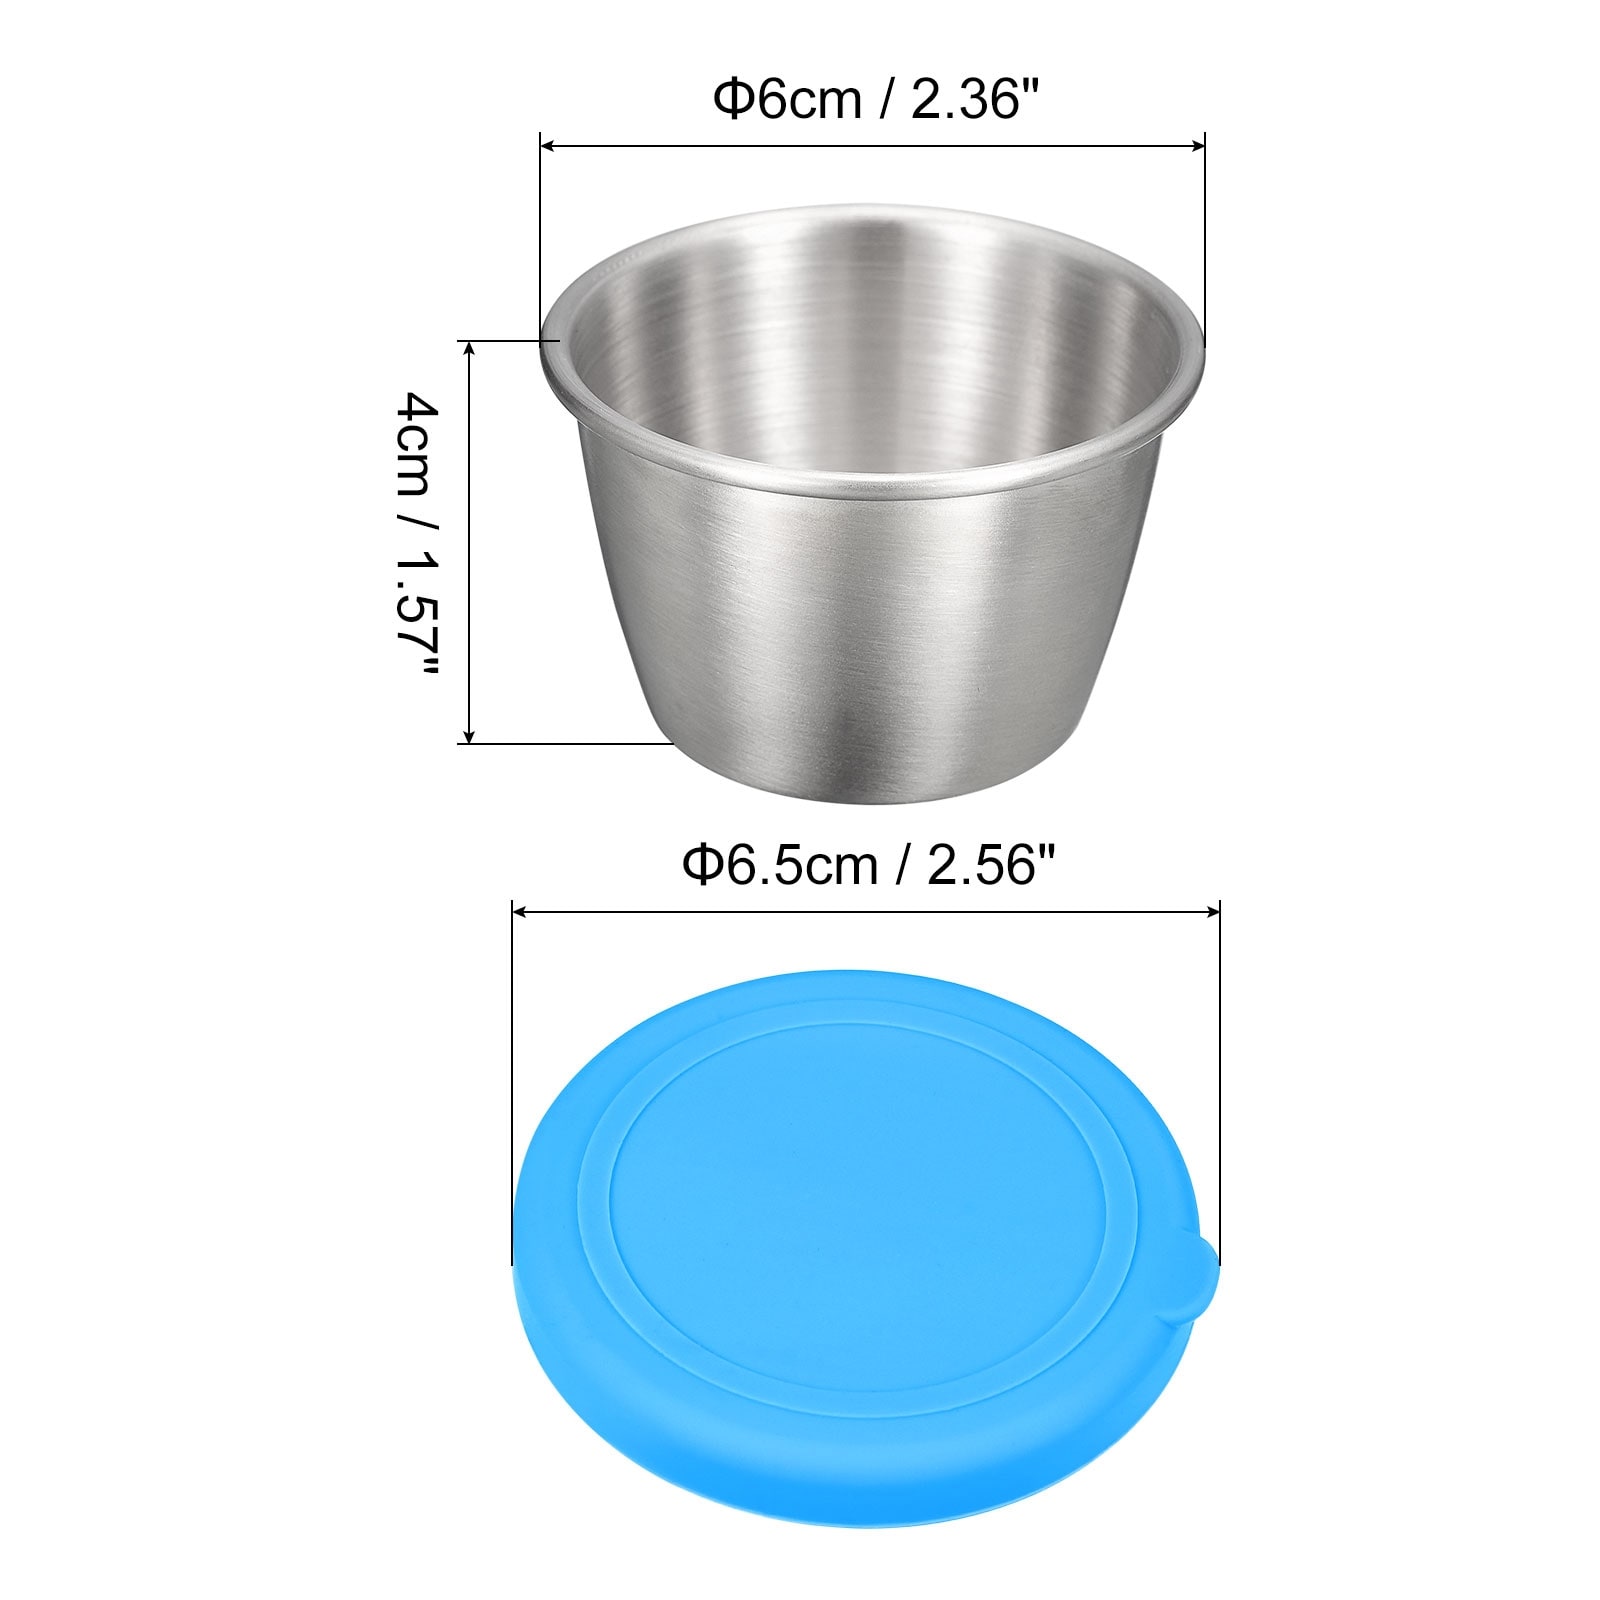 https://ak1.ostkcdn.com/images/products/is/images/direct/e43907ff8760a6245353f516ec33c045d8f238a7/4pcs-Small-Stainless-Steel-Condiment-Containers-Cups-for-Bento-Box.jpg